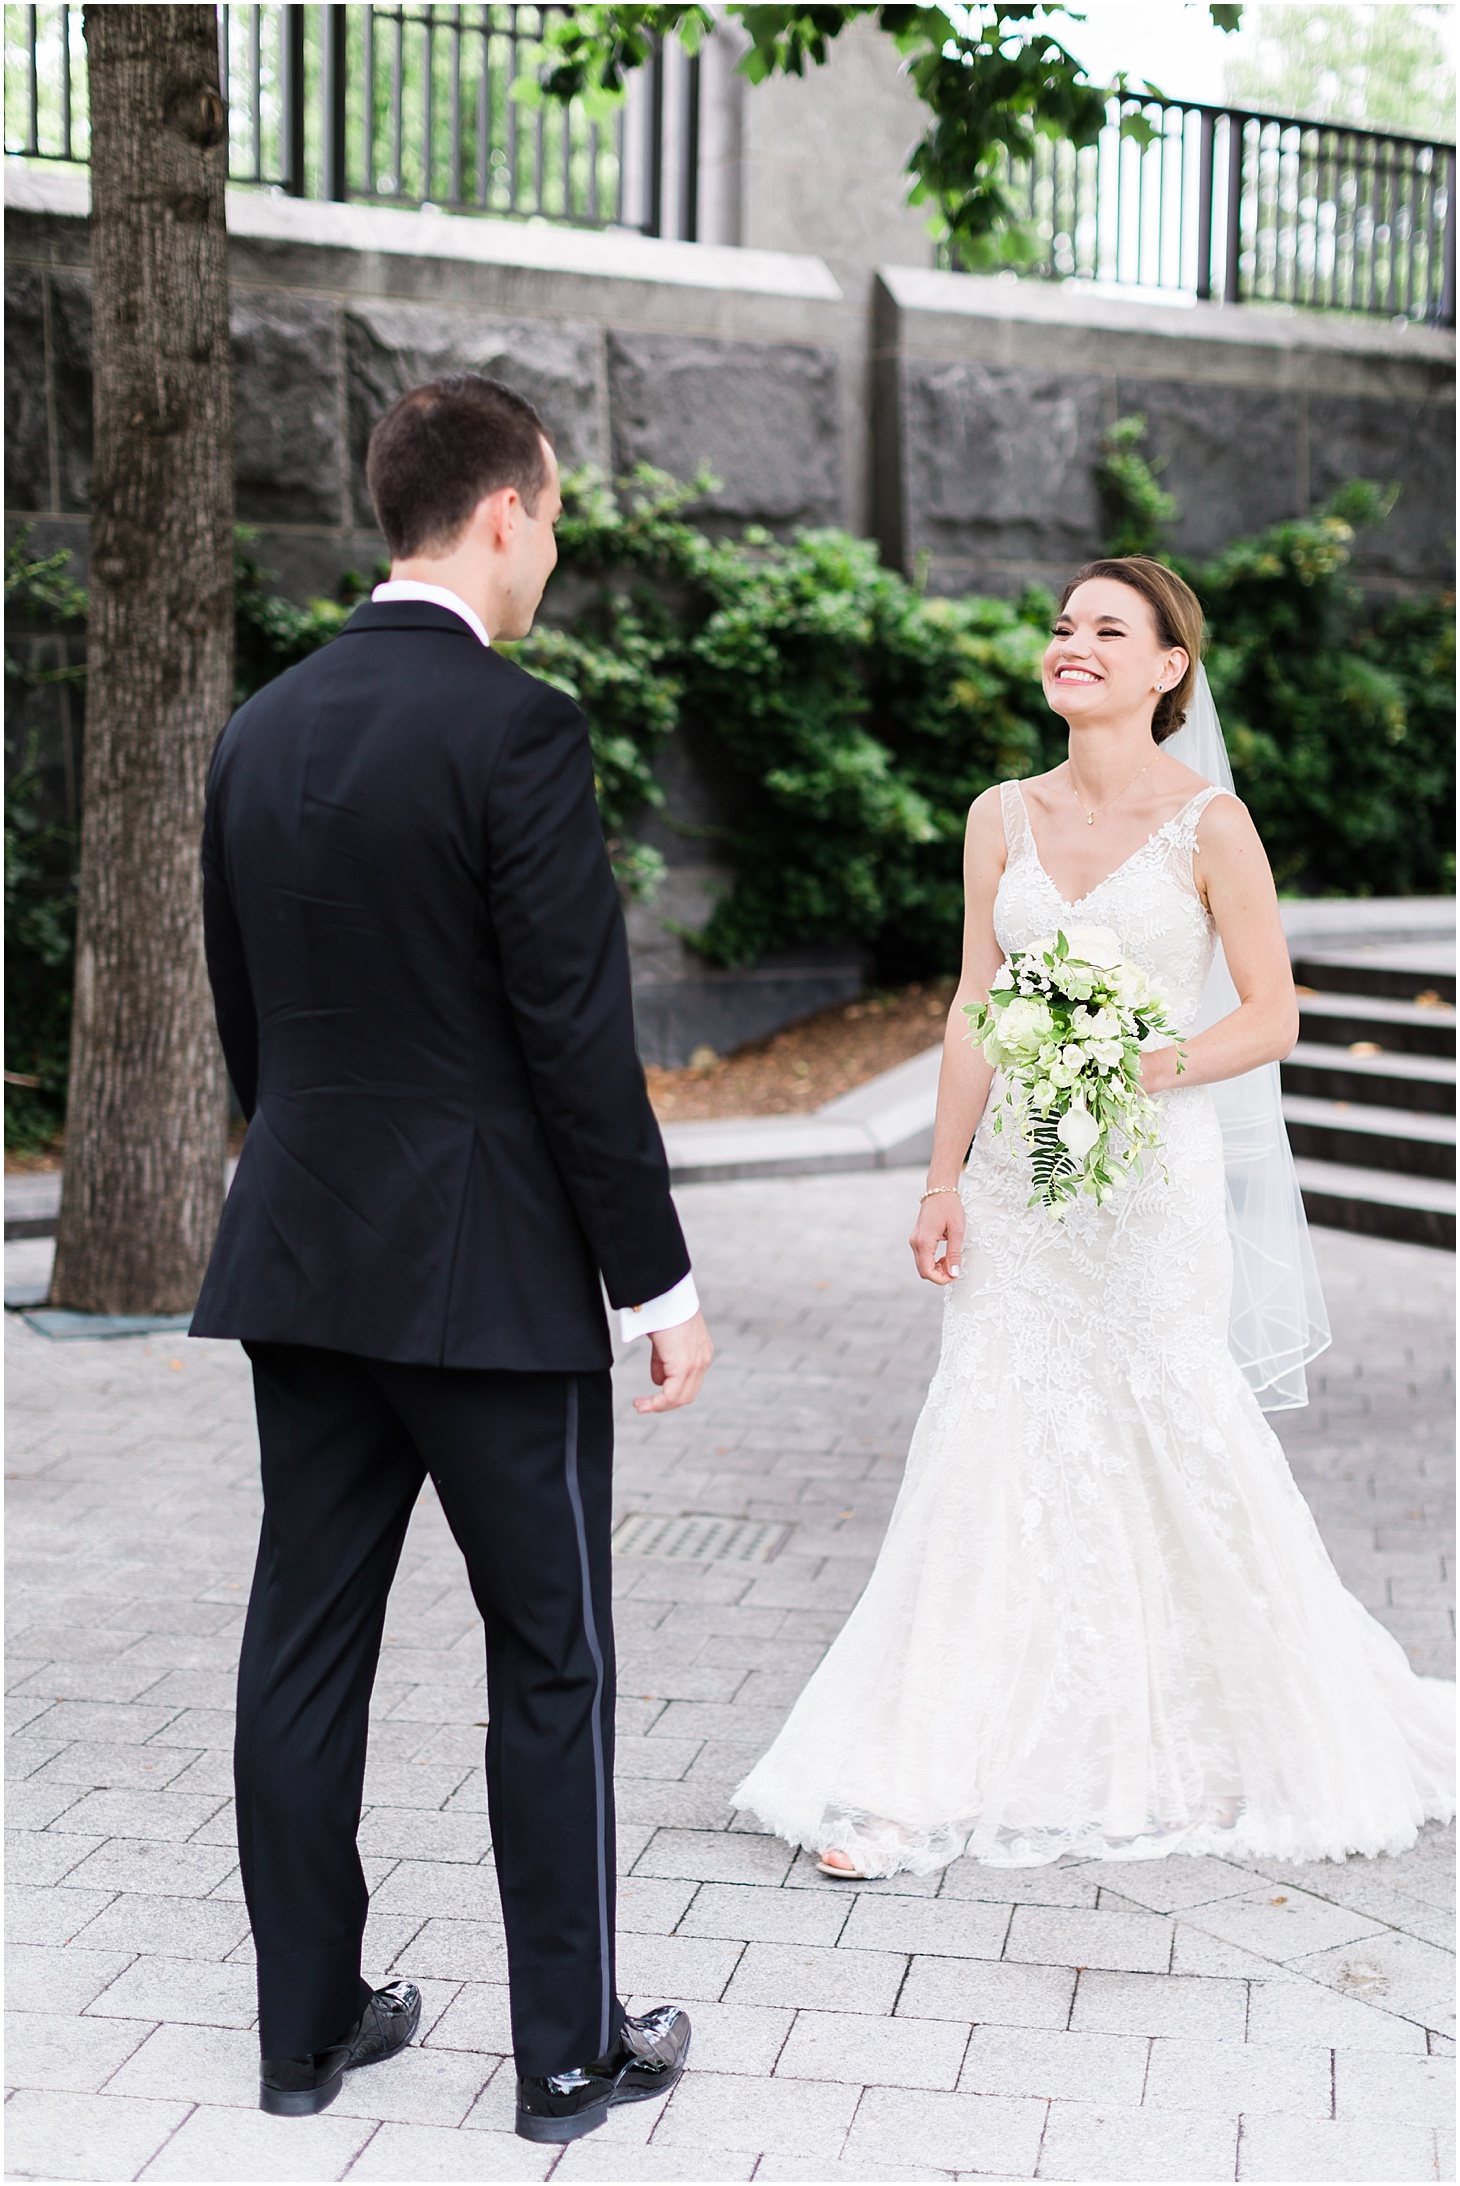 First Look at Capitol Visitors Center, Black Tie Hay-Adams Wedding with Summer Florals, Ceremony at Capitol Hill Baptist Church, Sarah Bradshaw Photography, DC Wedding Photographer